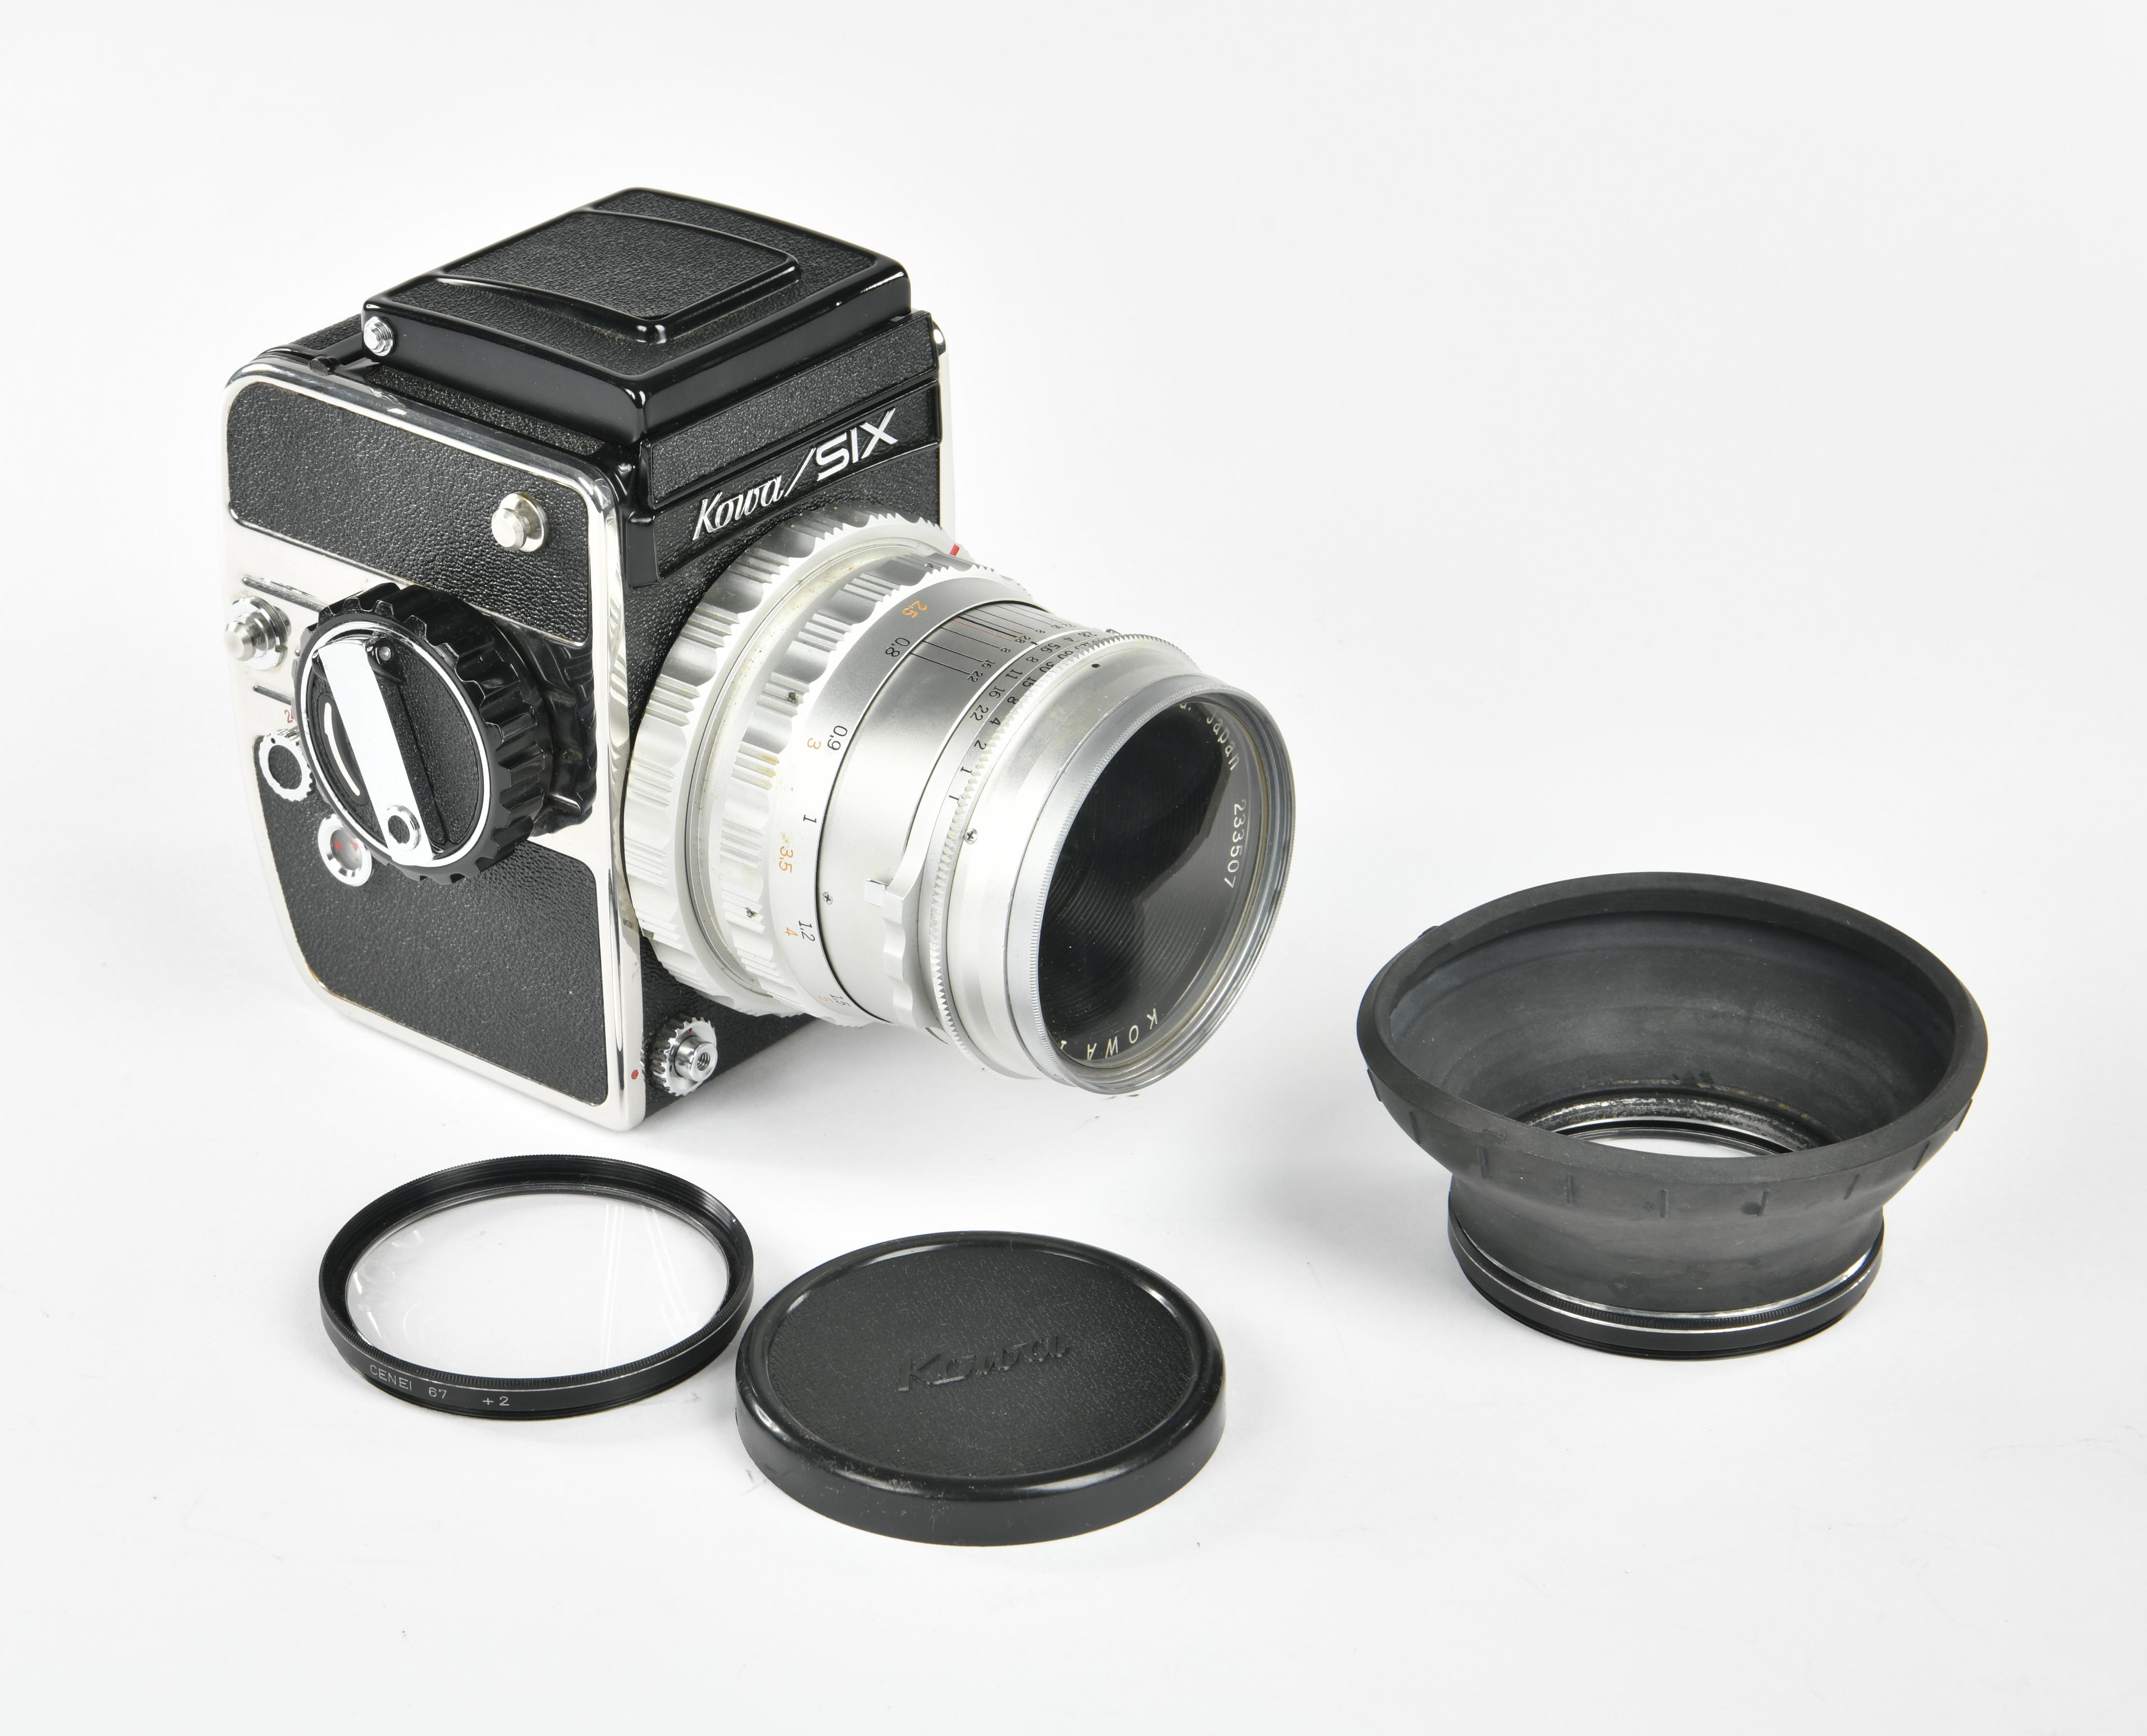 Kowa Six 6x6 camera with Kowa 2,8/85mm, Japan, function ok, with close-up lens, in case